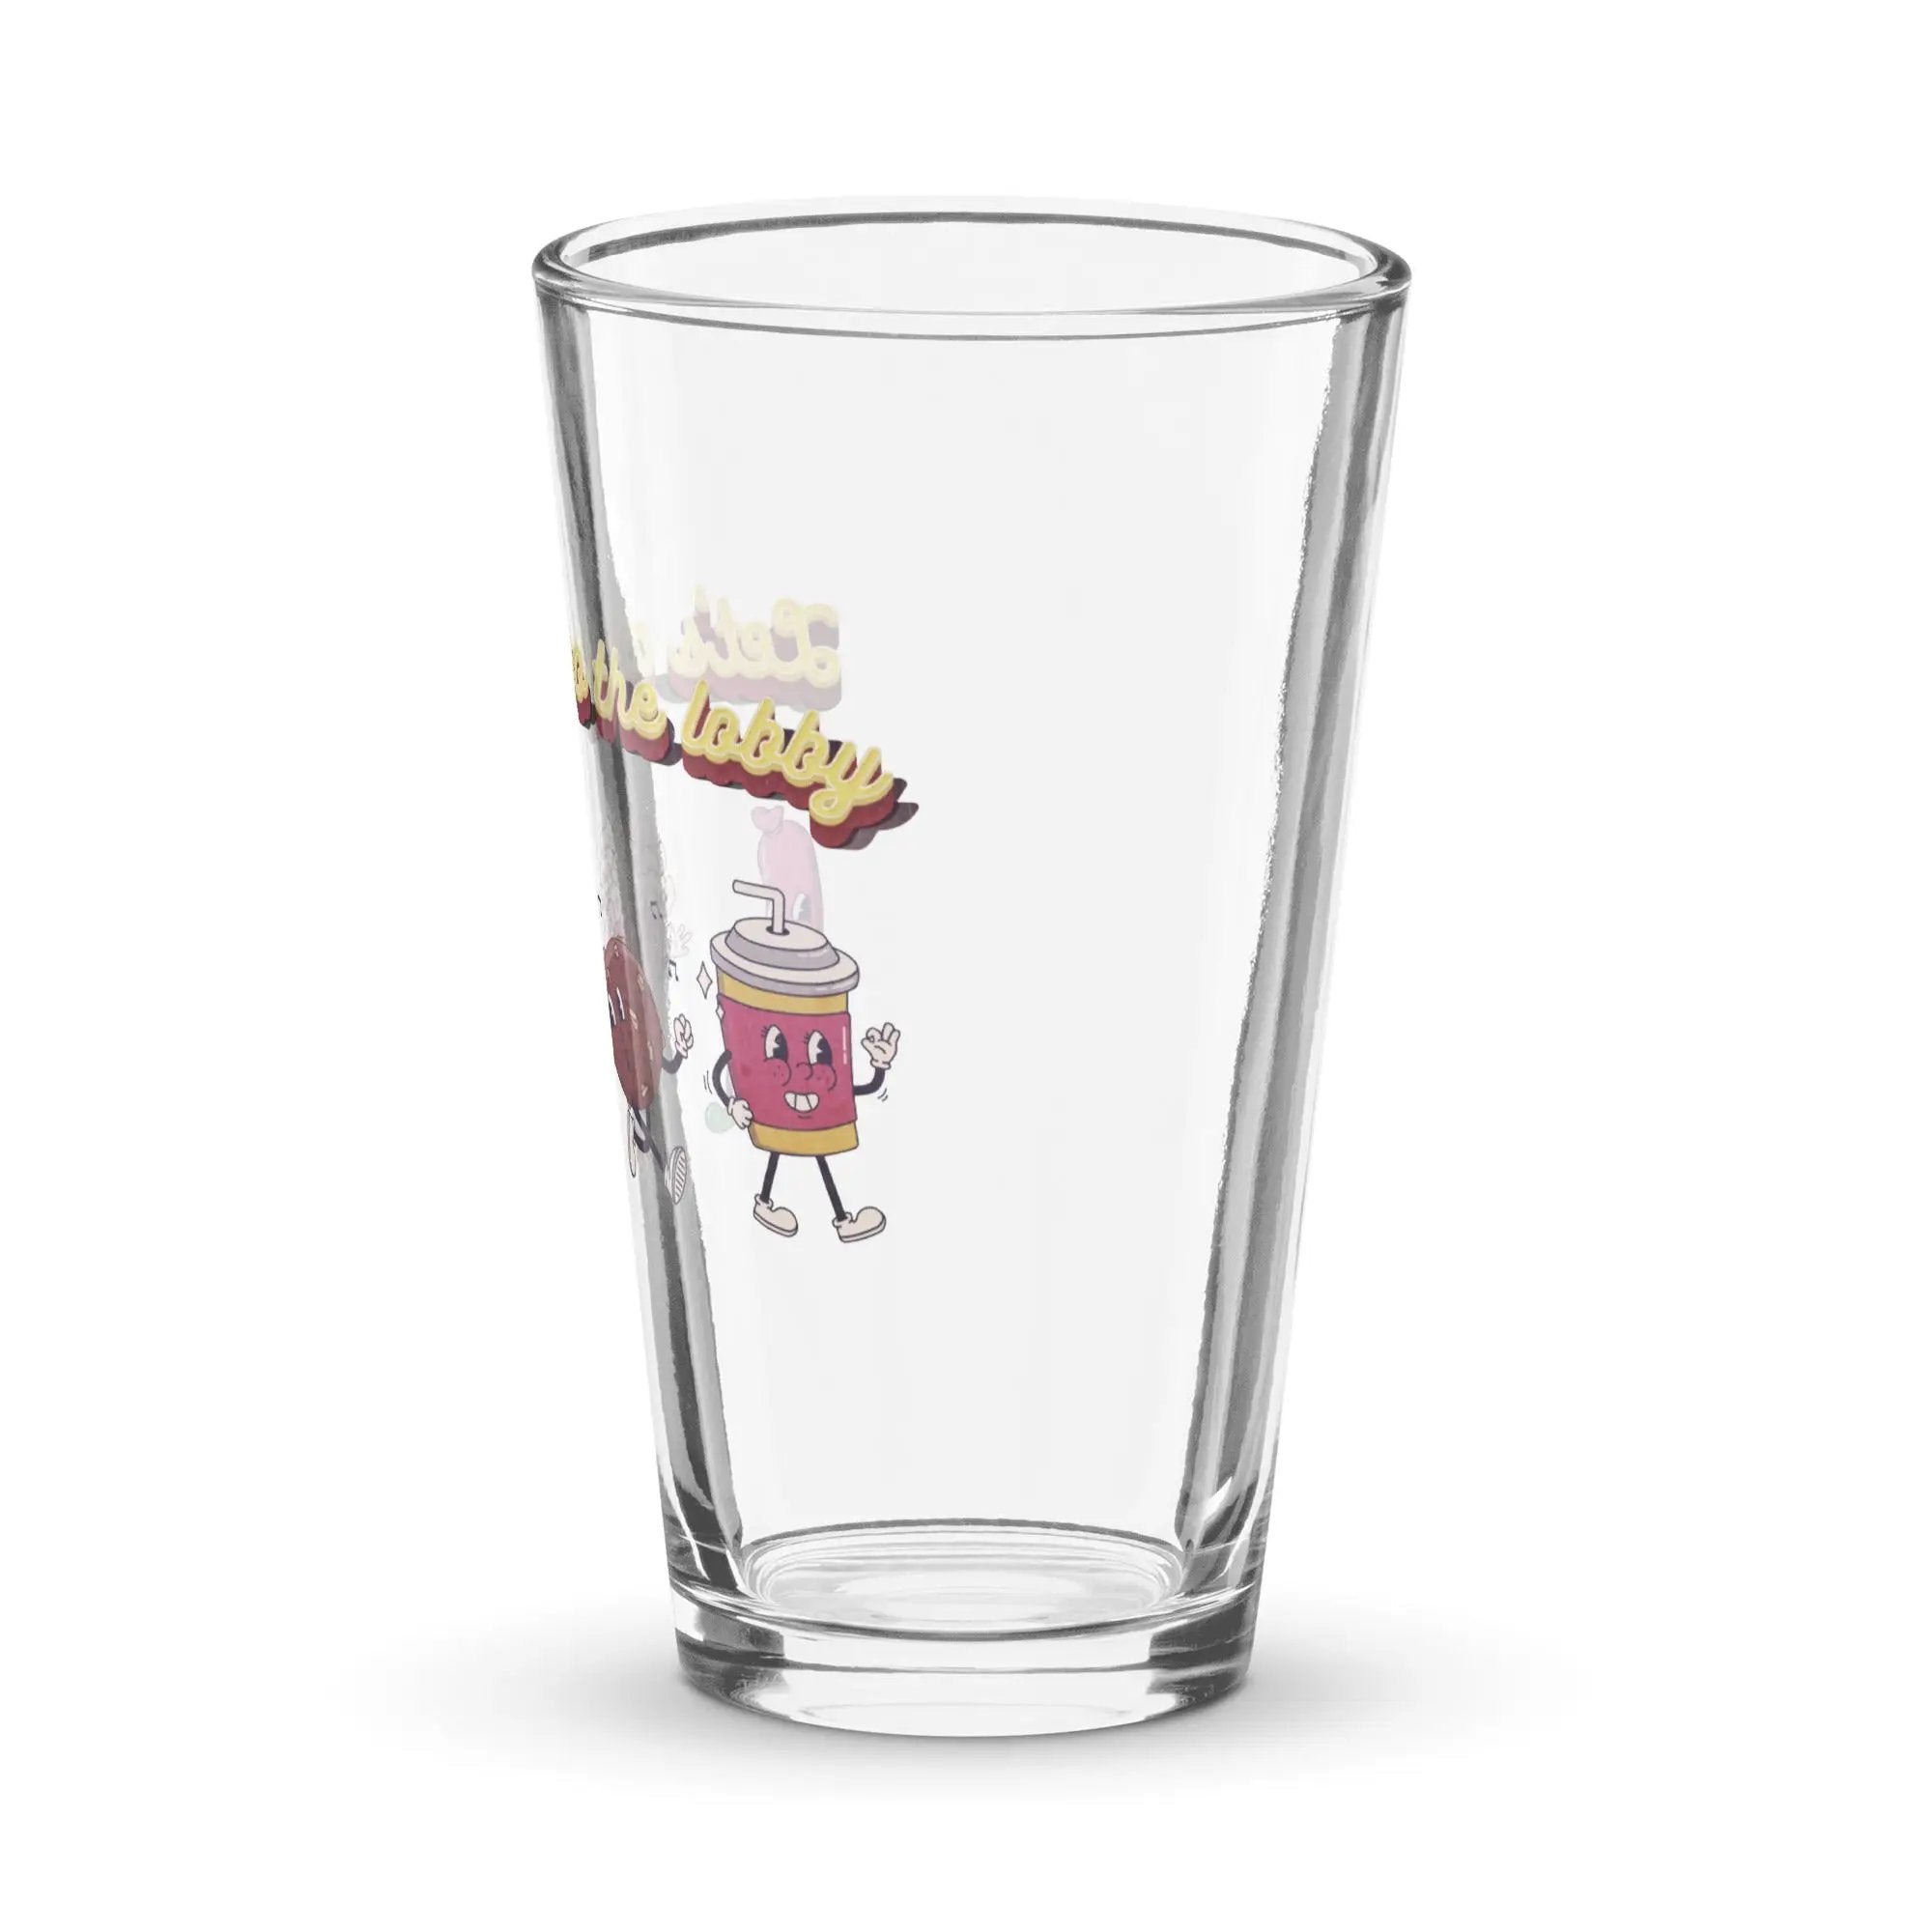 a shot glass with a cartoon character on it